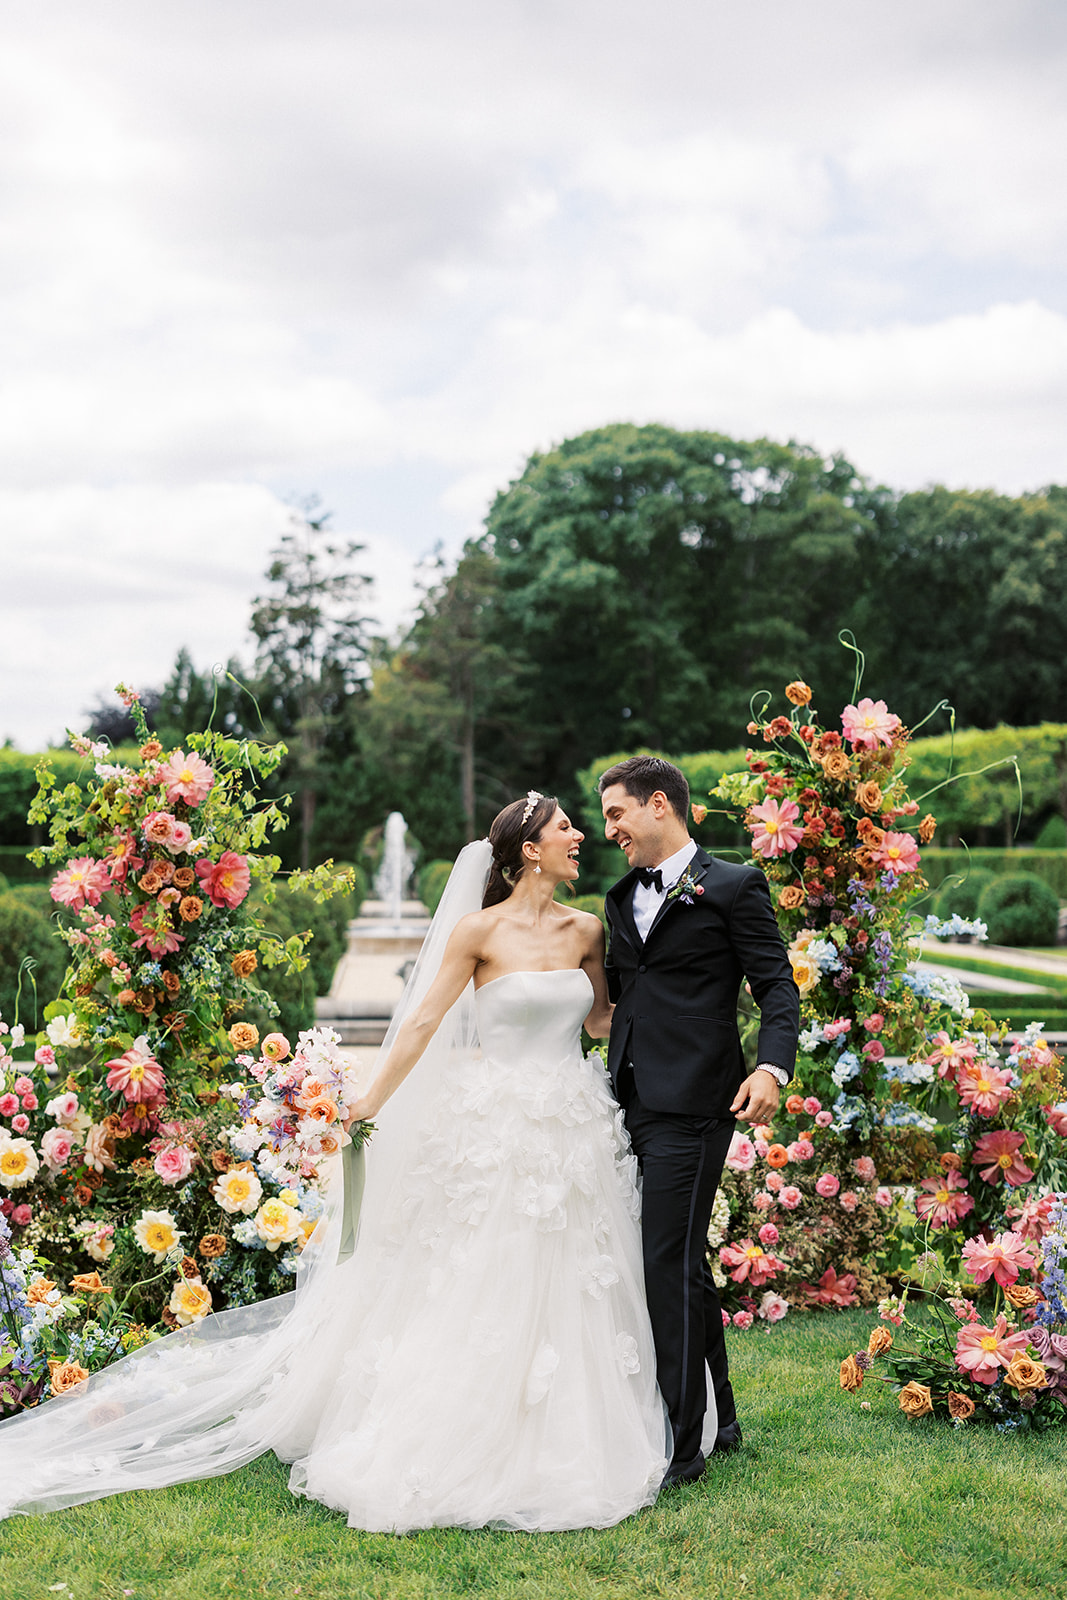 Newlyweds laugh and walk through a large floral arch at their Oheka Castle wedding ceremony